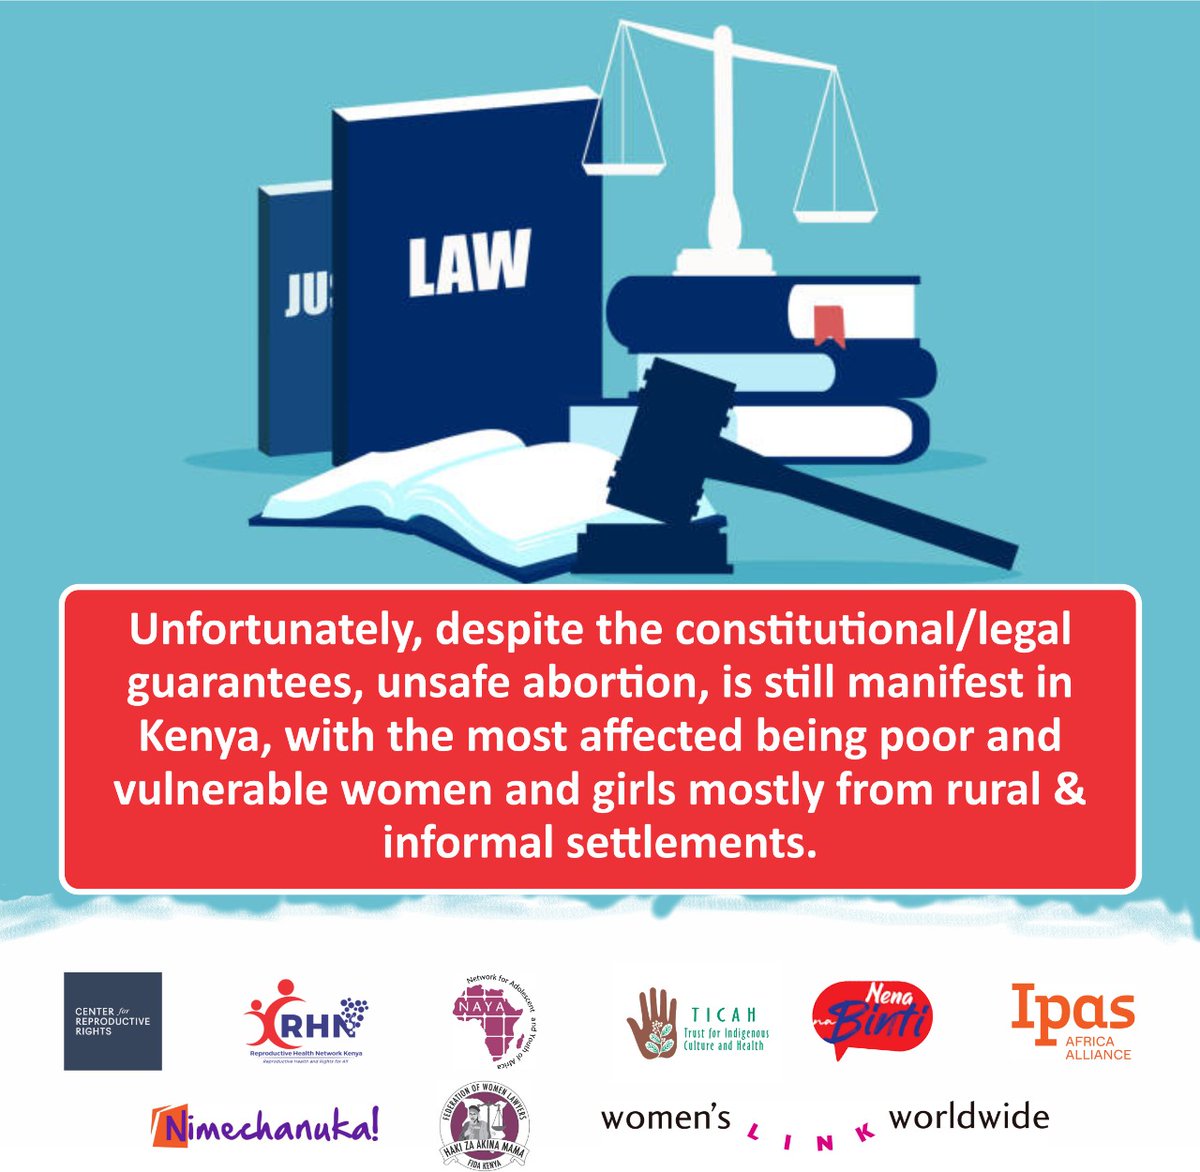 Despite the constitutional/legal guarantees, unsafe abortion, is still manifest in Kenya, with the most affected being poor and vulnerable women and girls mostly from rural & informal settlements. #DefendHerRightsKE @ReproRights @fidakenya @IpasOrg @nimechanuka @Loch_Omam